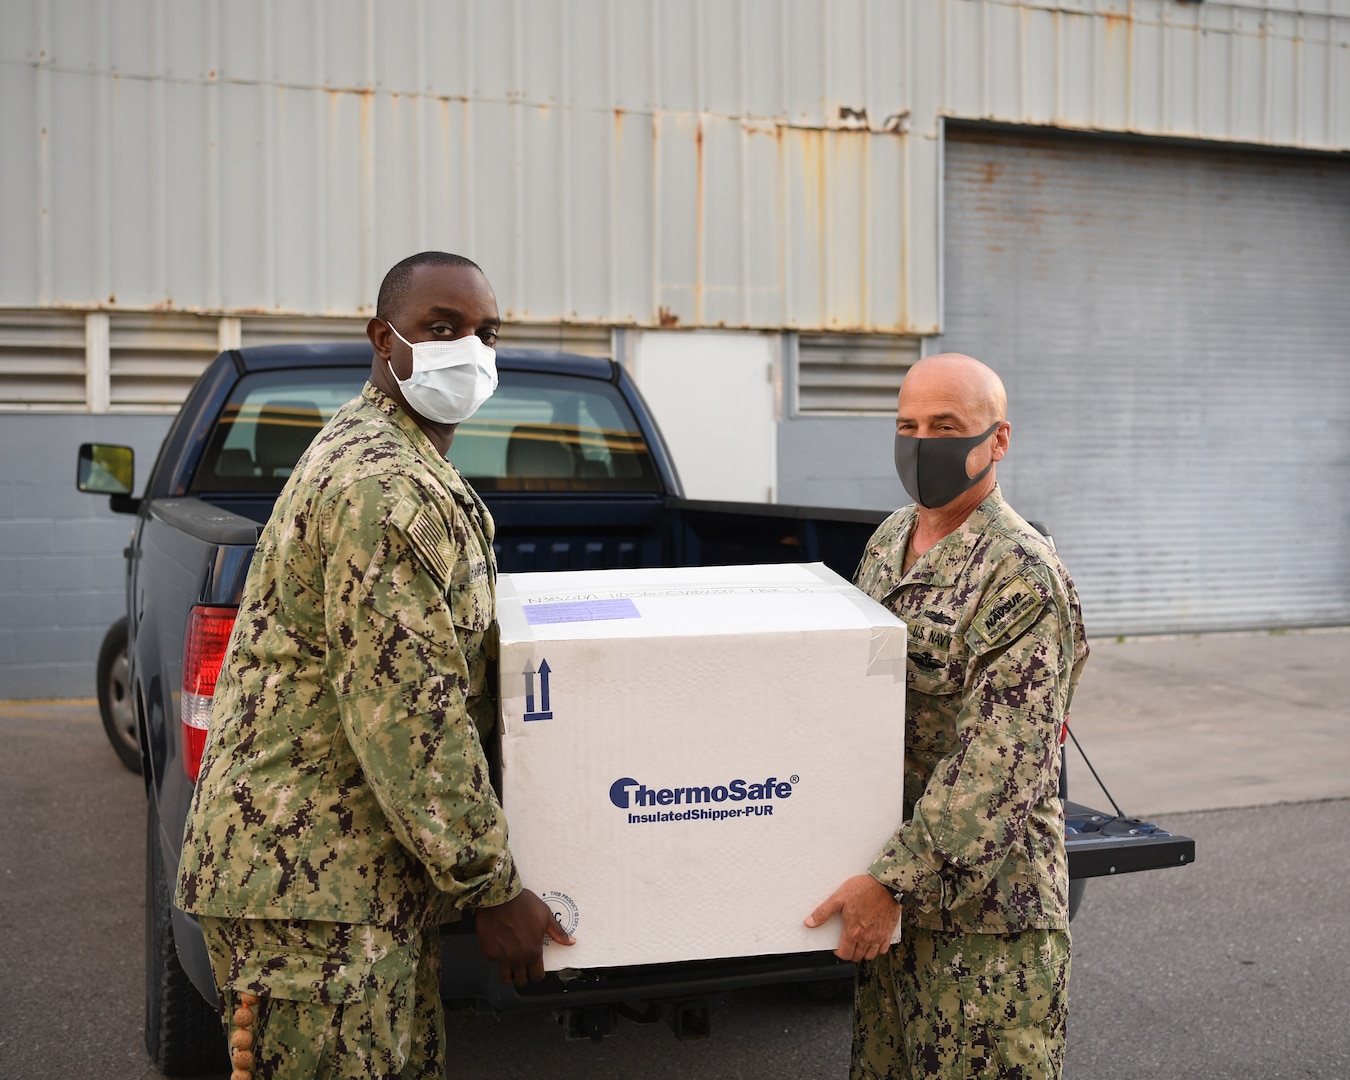 A white man and black man in camo uniforms hold a white box in front of a blue pickup truck.